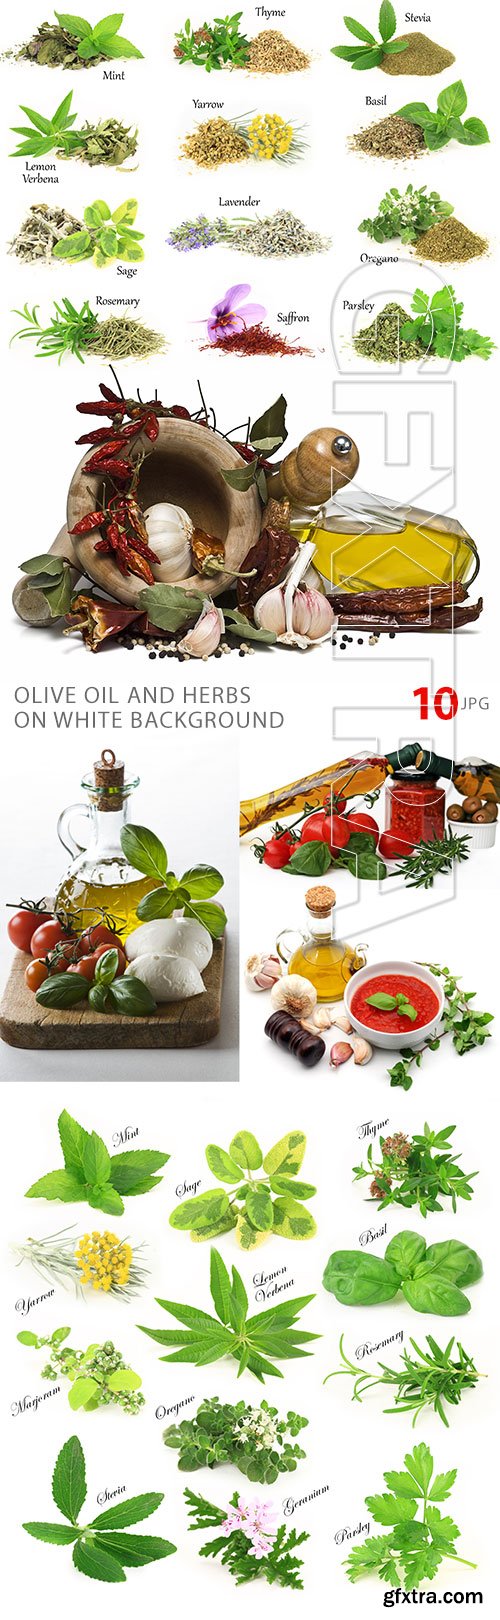 Olive Oil and Herbs on White Background 10xJPG